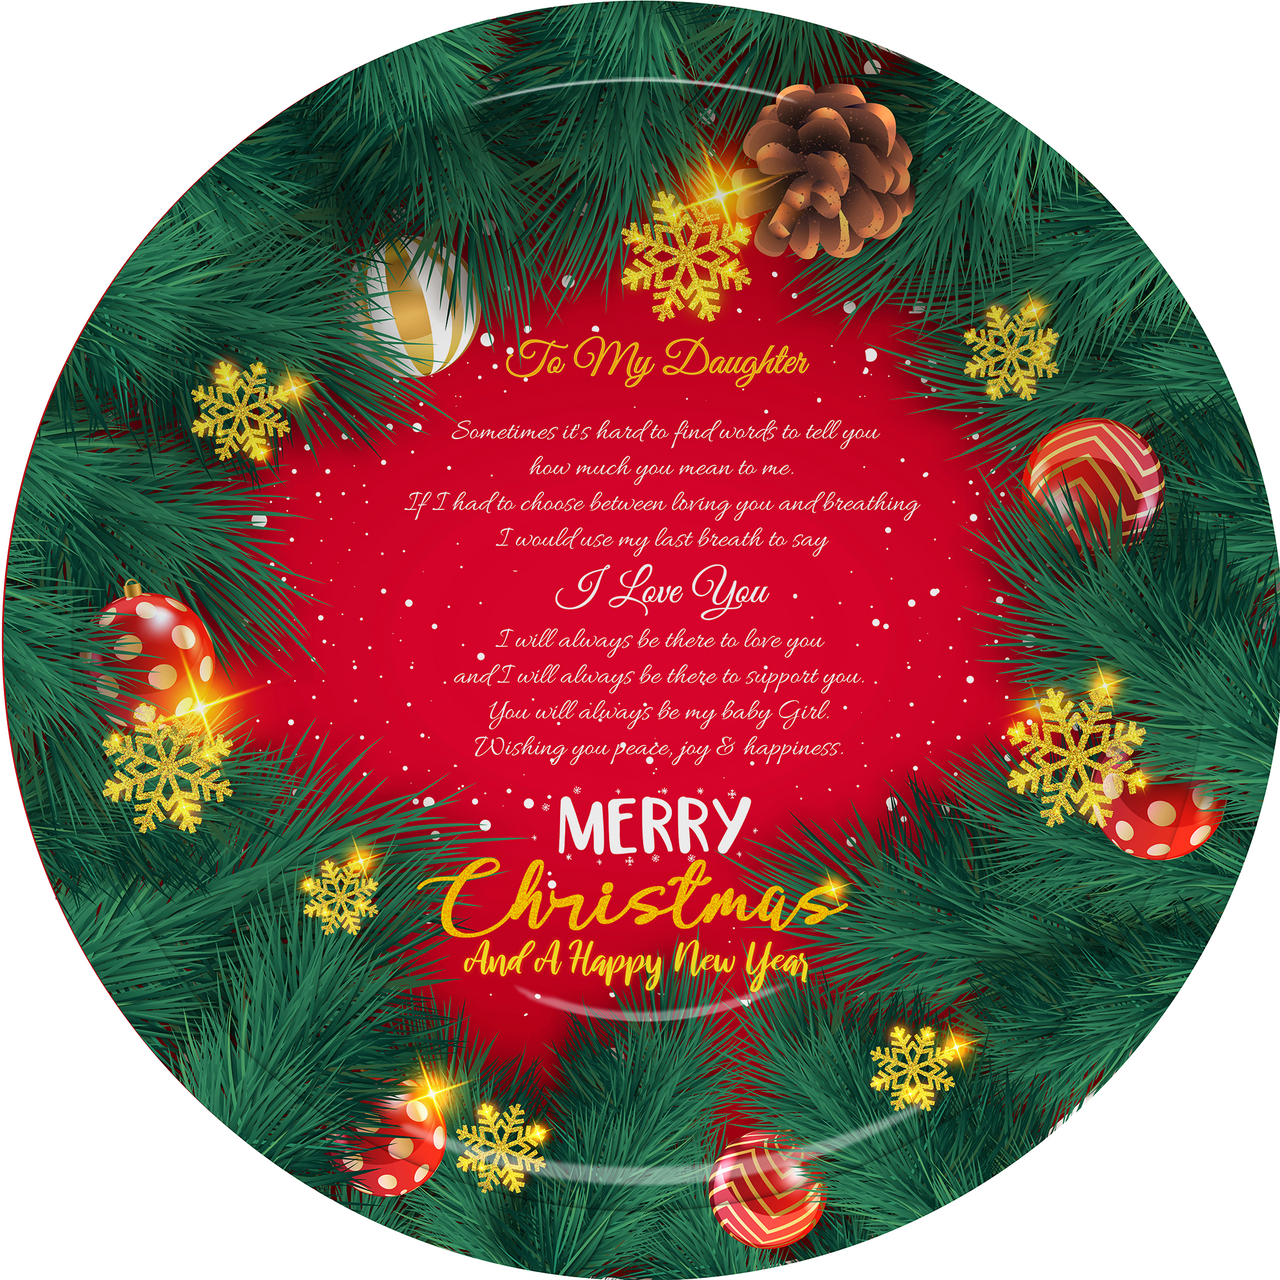 Christmas Plate - Sometimes it's hard to find words to tell you